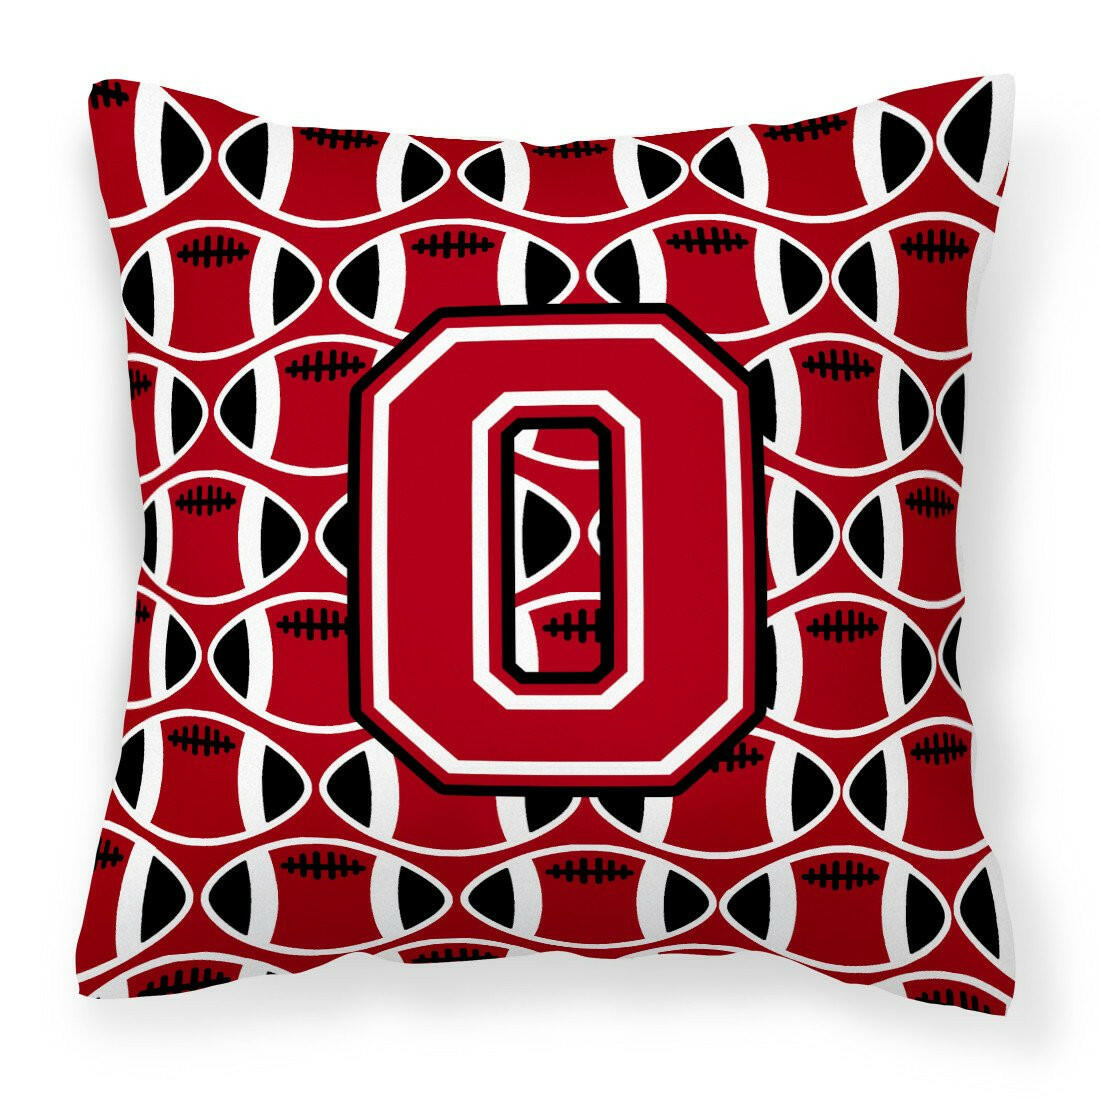 Letter O Football Red, Black and White Fabric Decorative Pillow CJ1073-OPW1414 by Caroline's Treasures